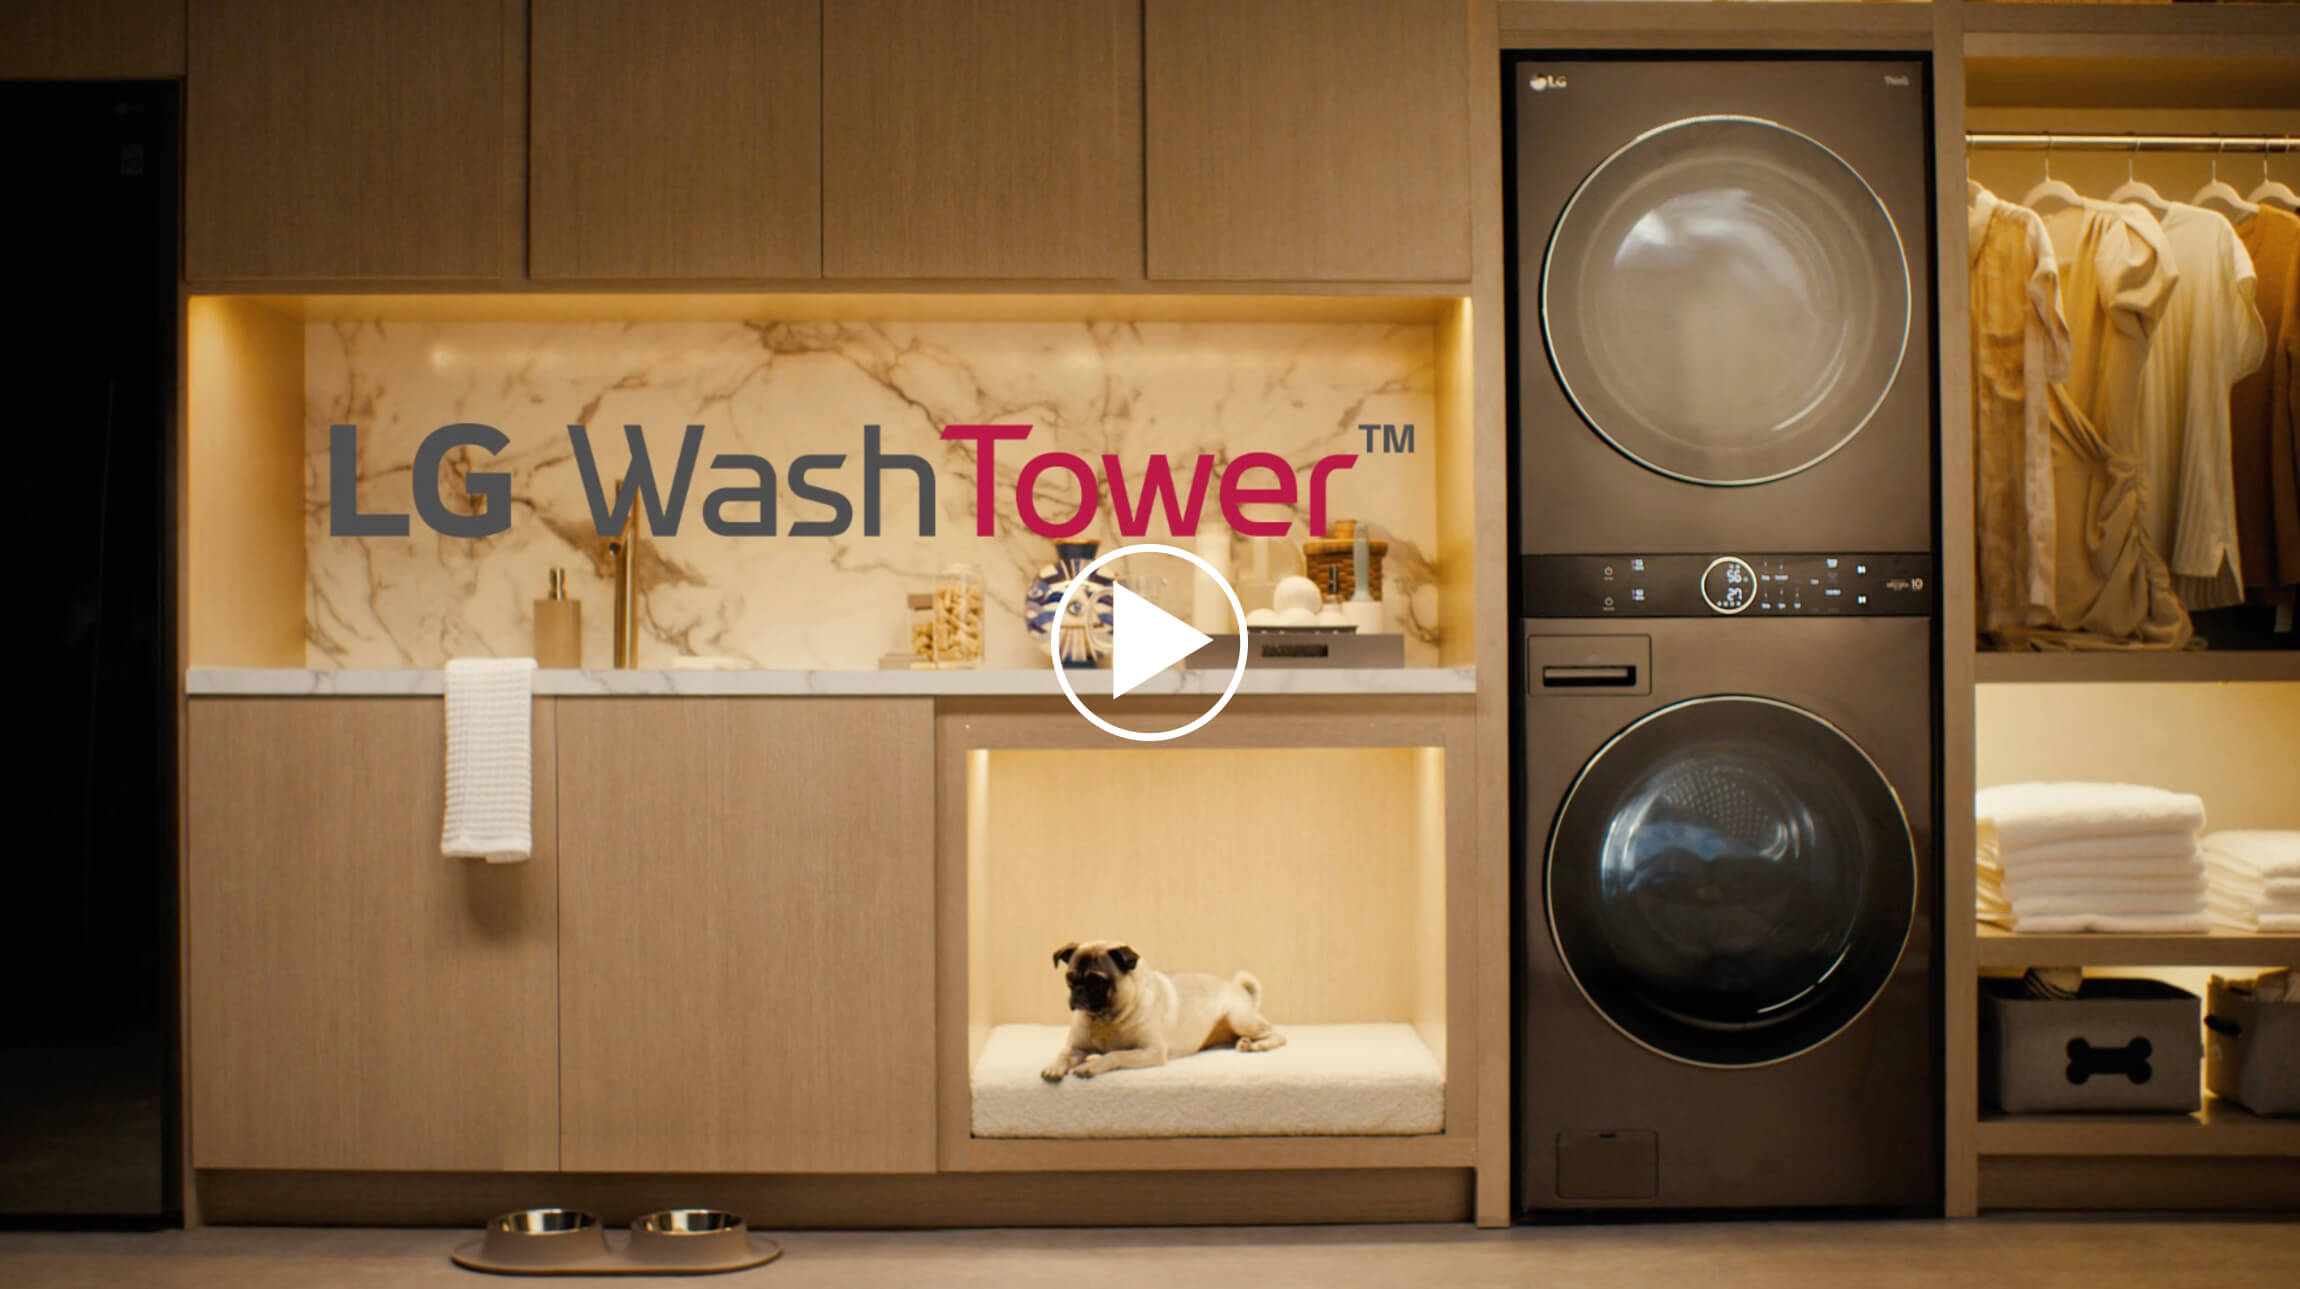 LG Washtower - Redefining the laundry experience in half the space